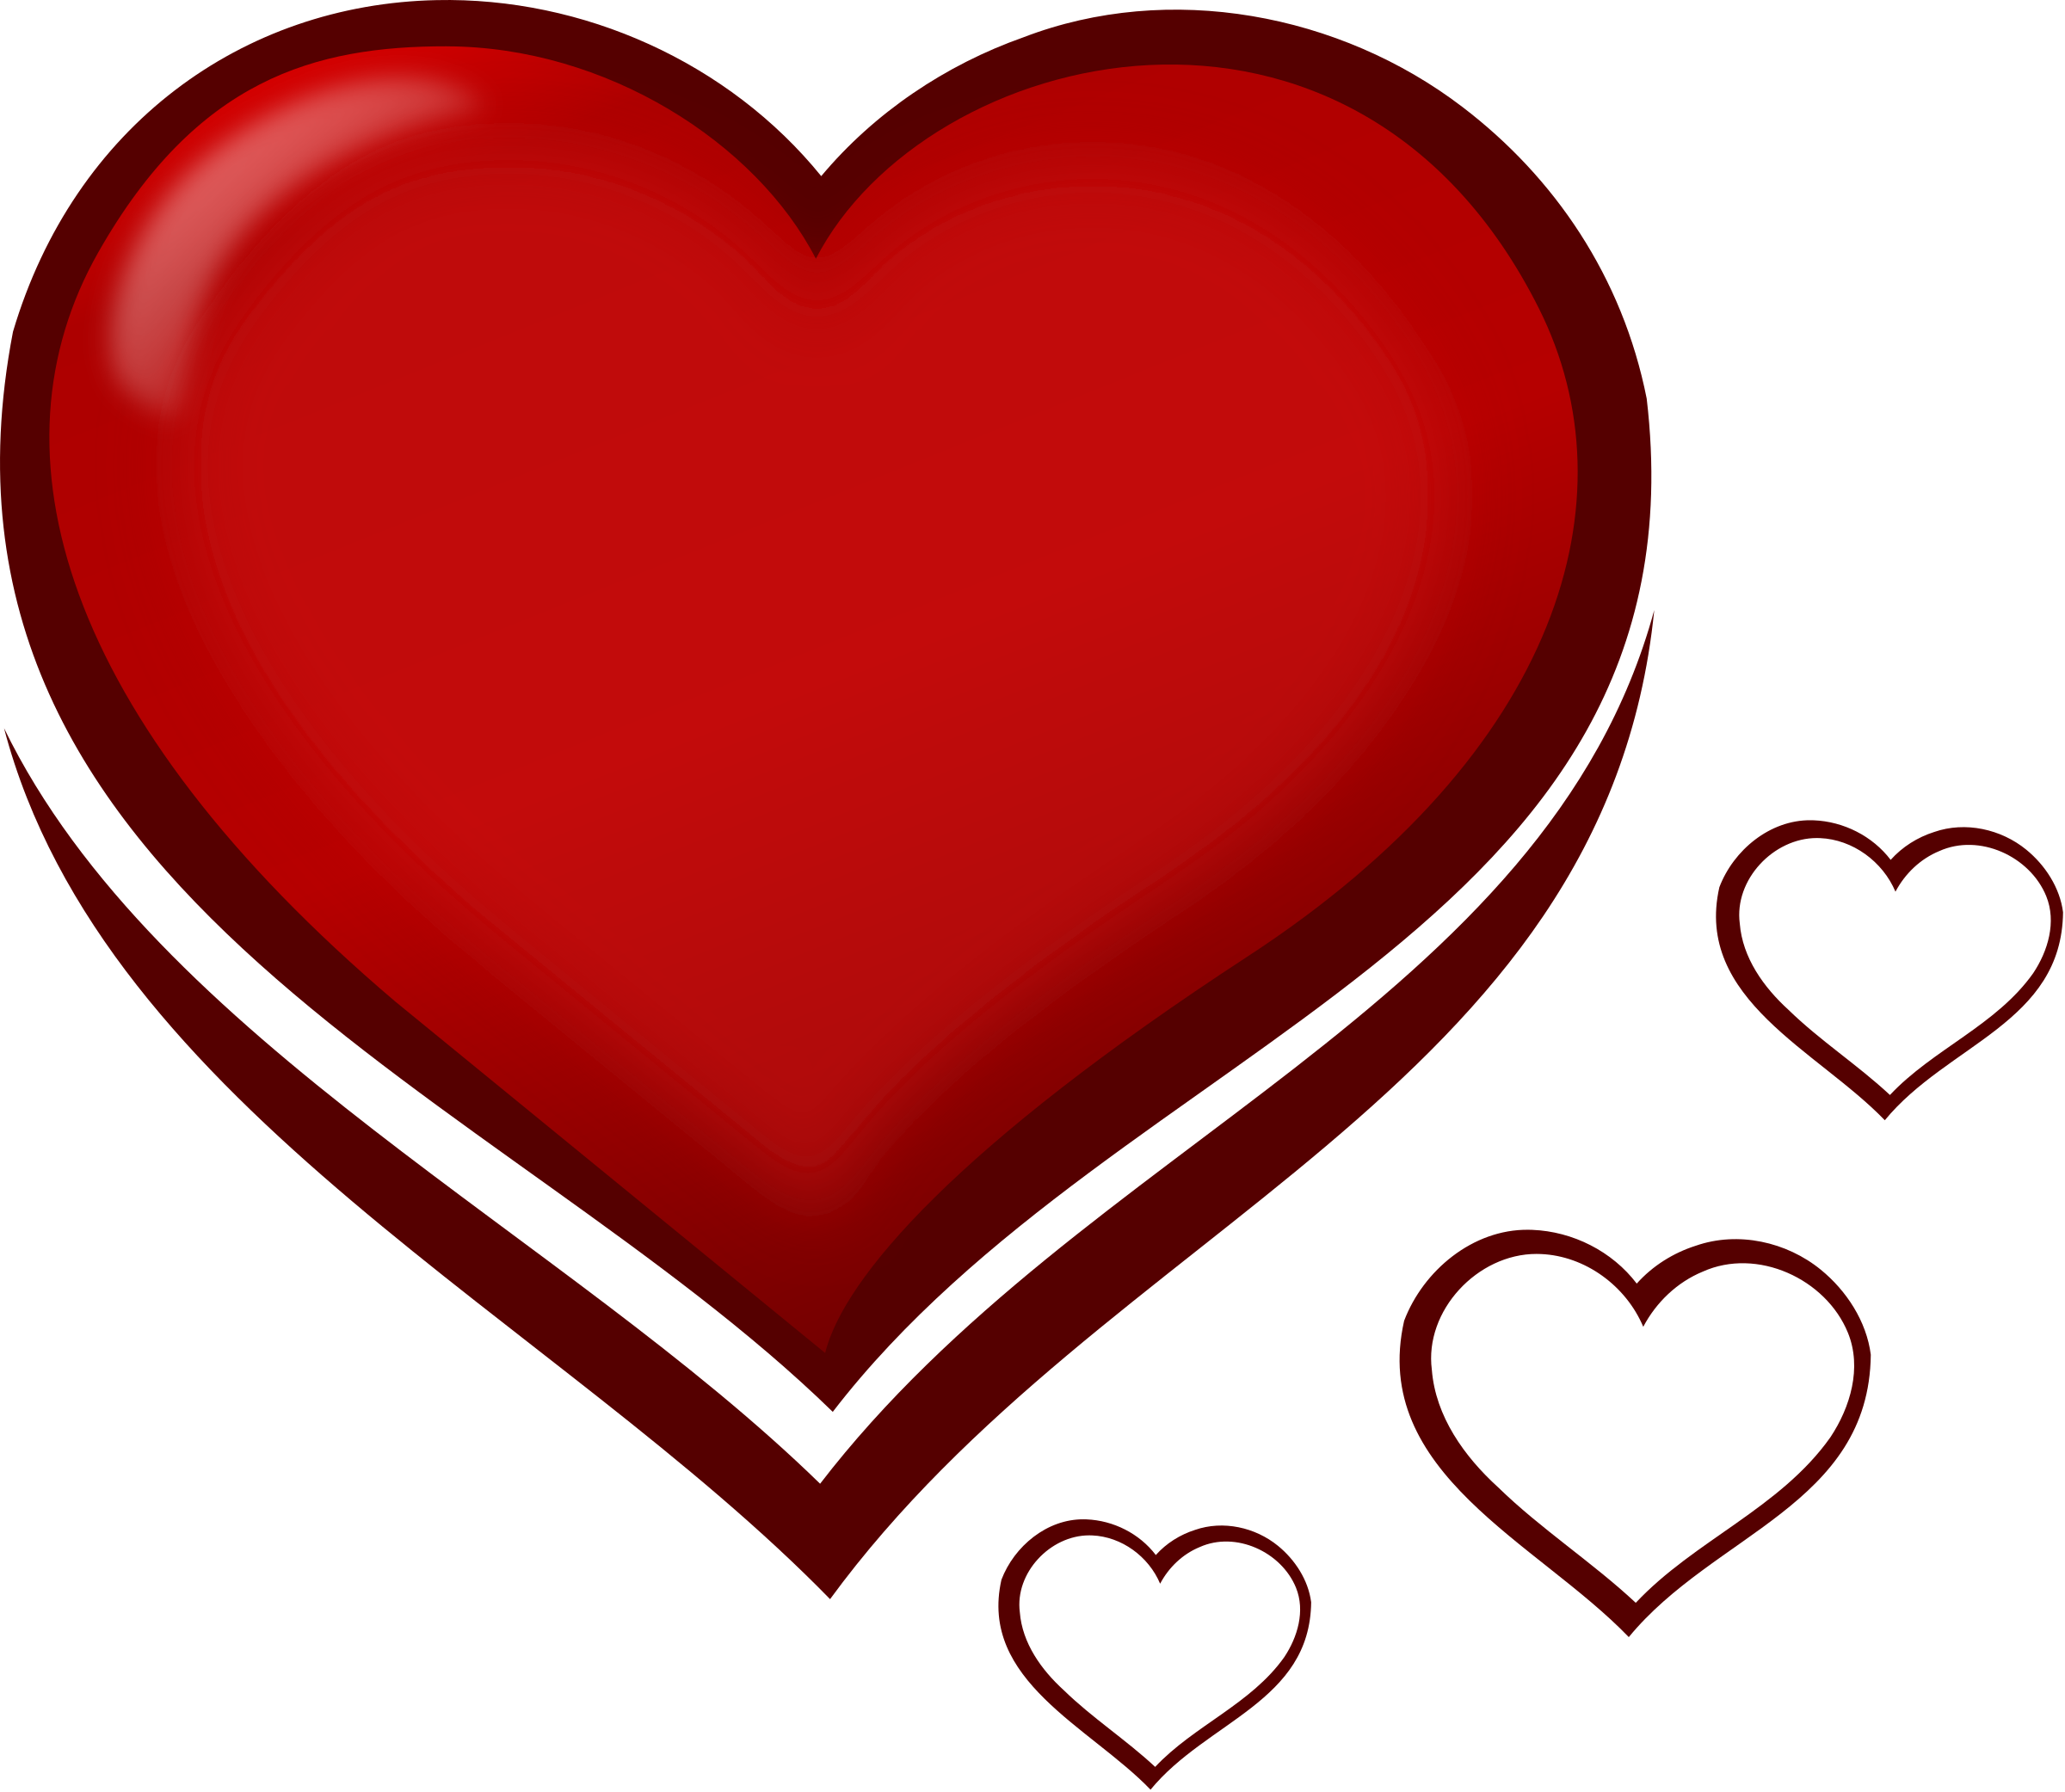 Drawings Of Hearts PNG HD Quality